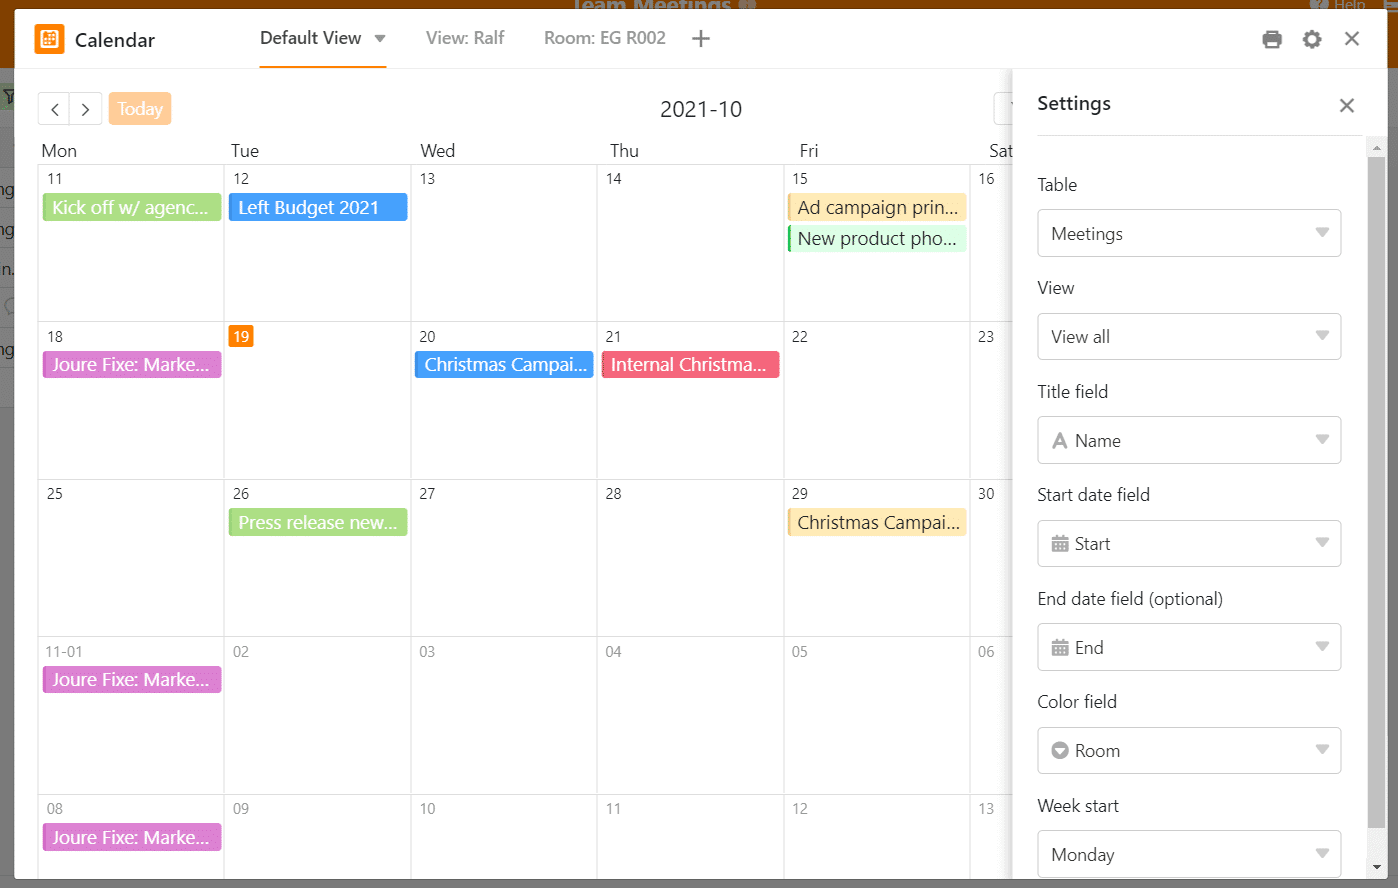 In the calendar you can see all meetings